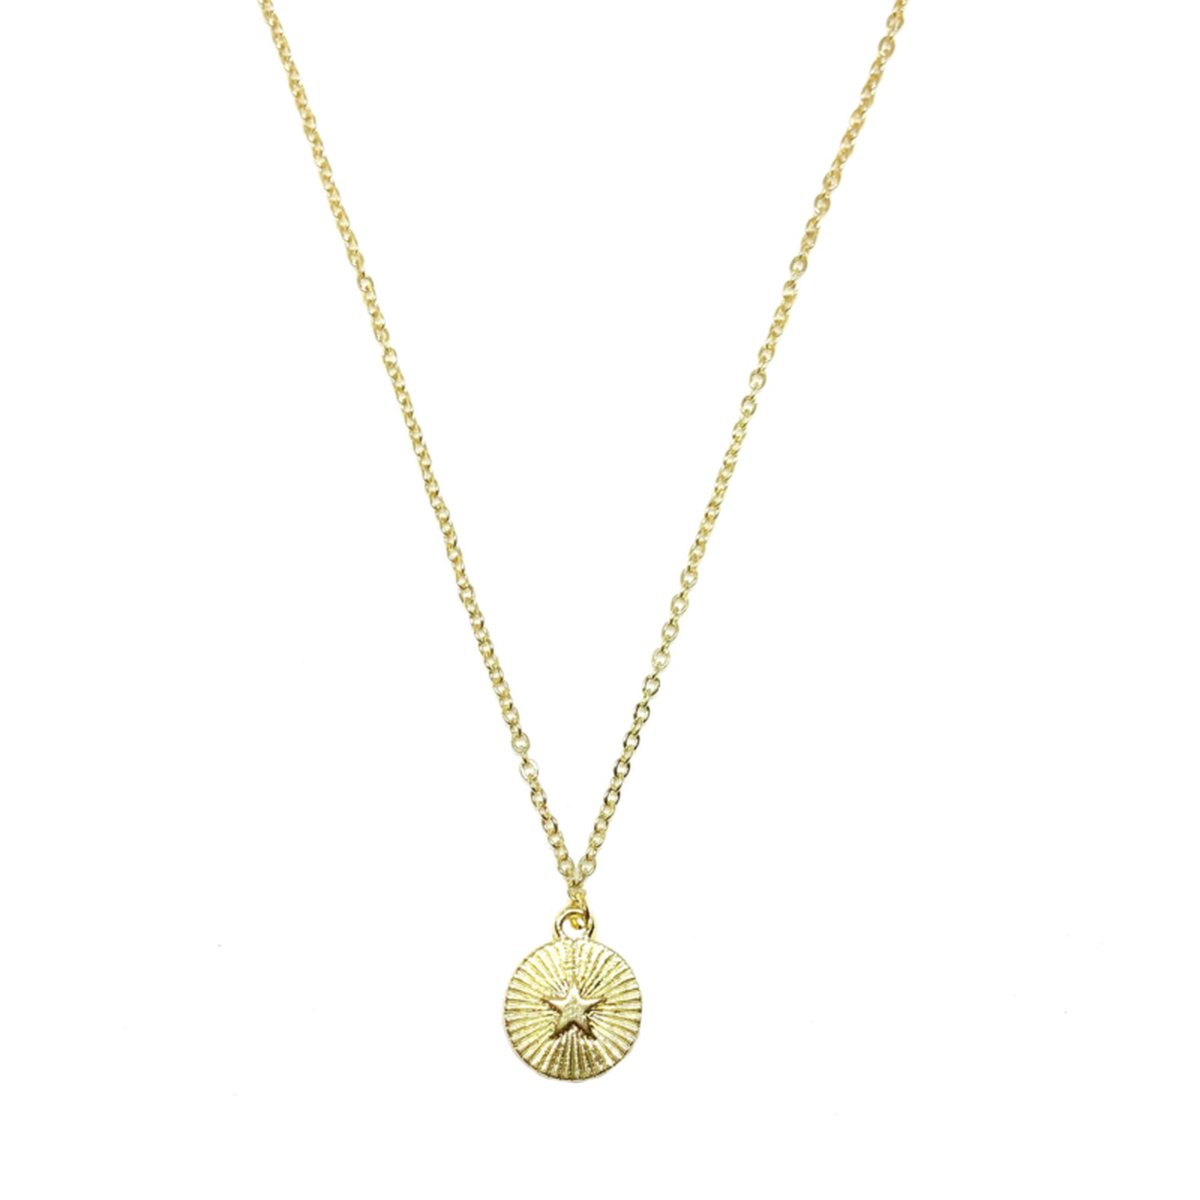 Coin & star necklace - gold